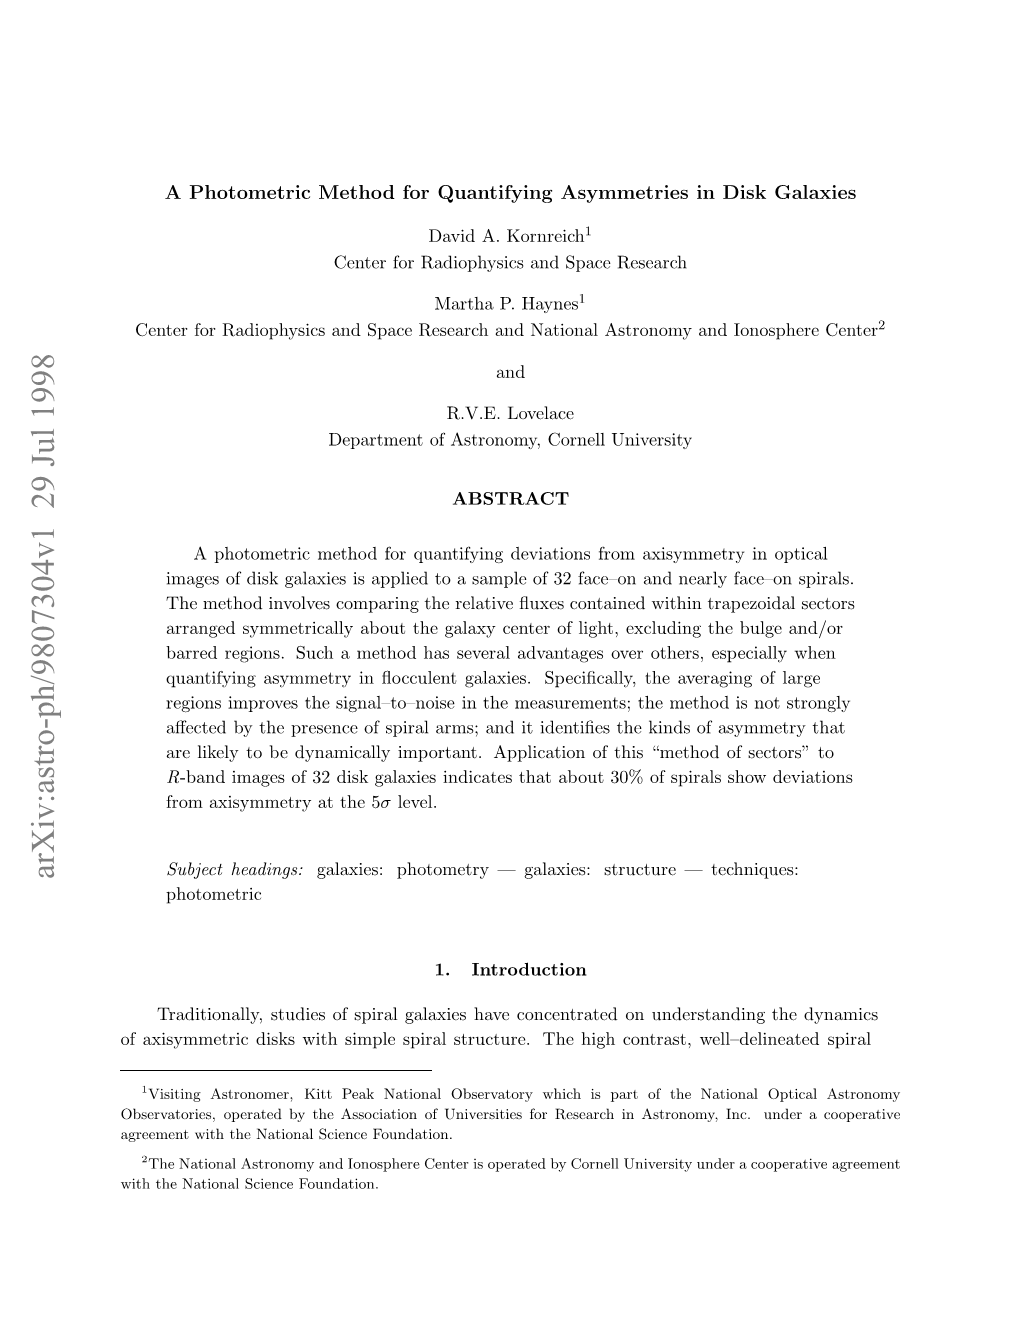 A Photometric Method for Quantifying Asymmetries in Disk Galaxies